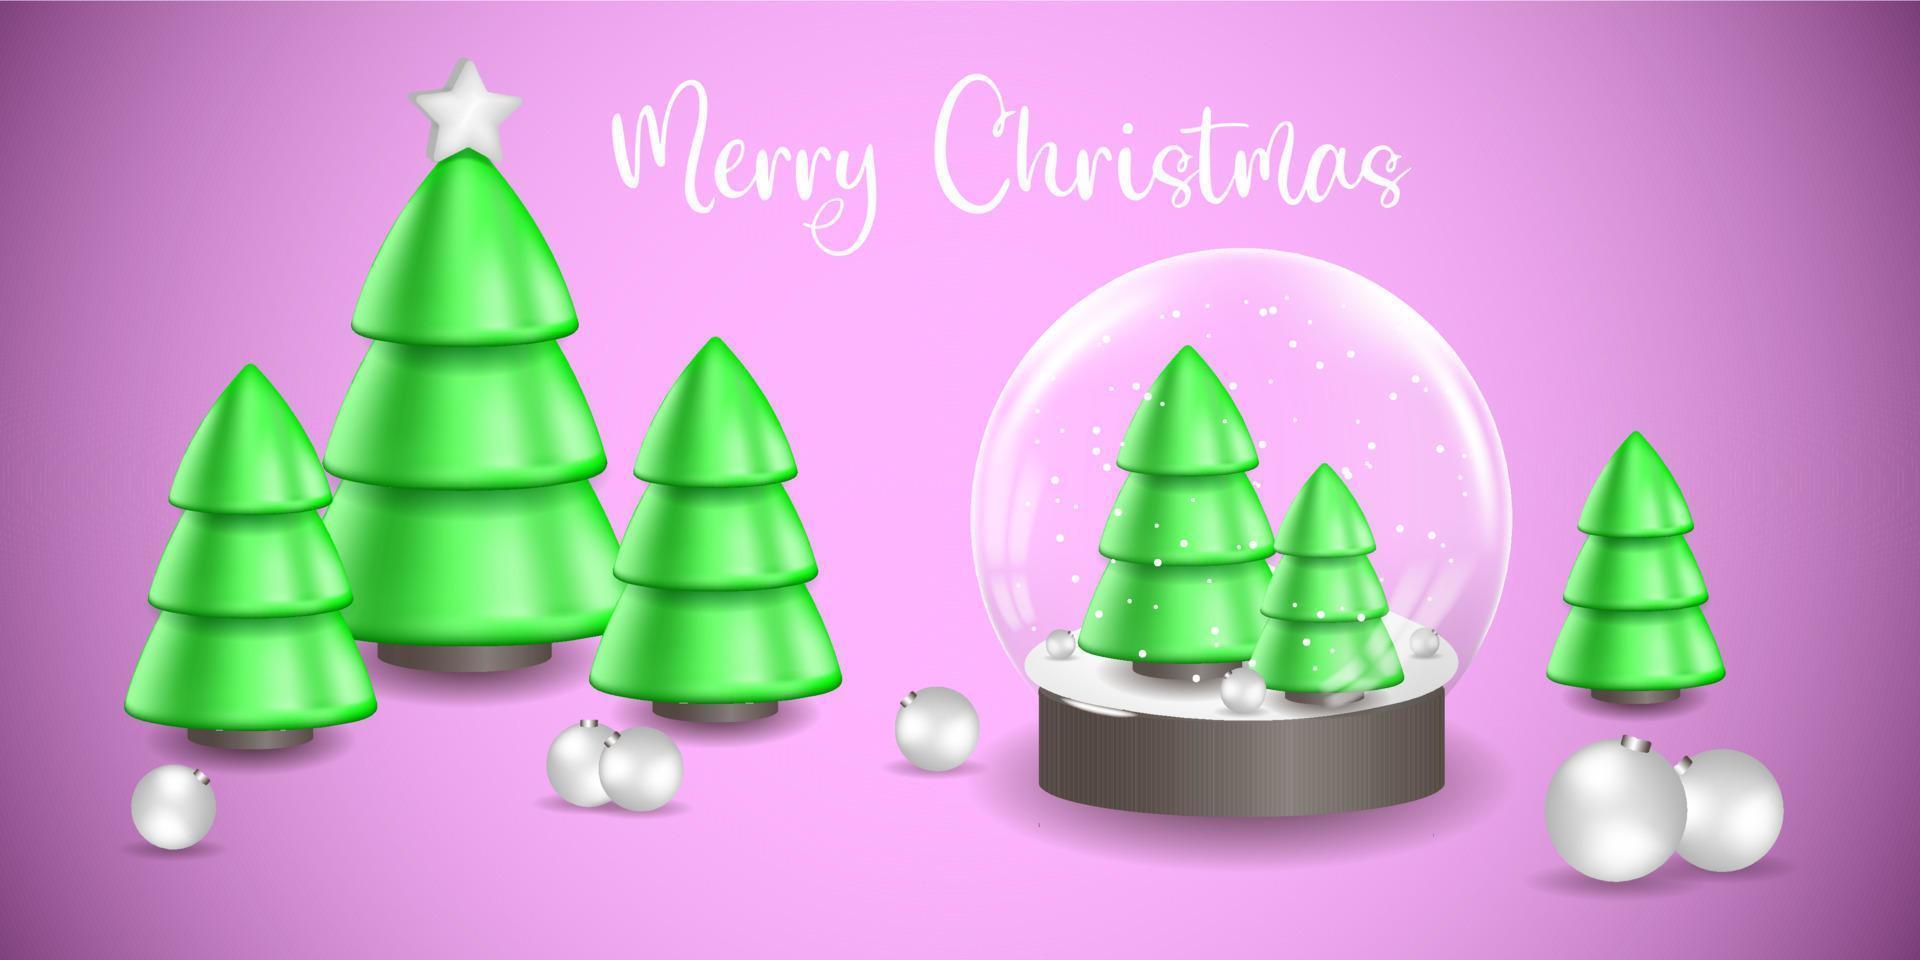 Merry Christmas, green Christmas trees with a star, glass ball Vector illustration